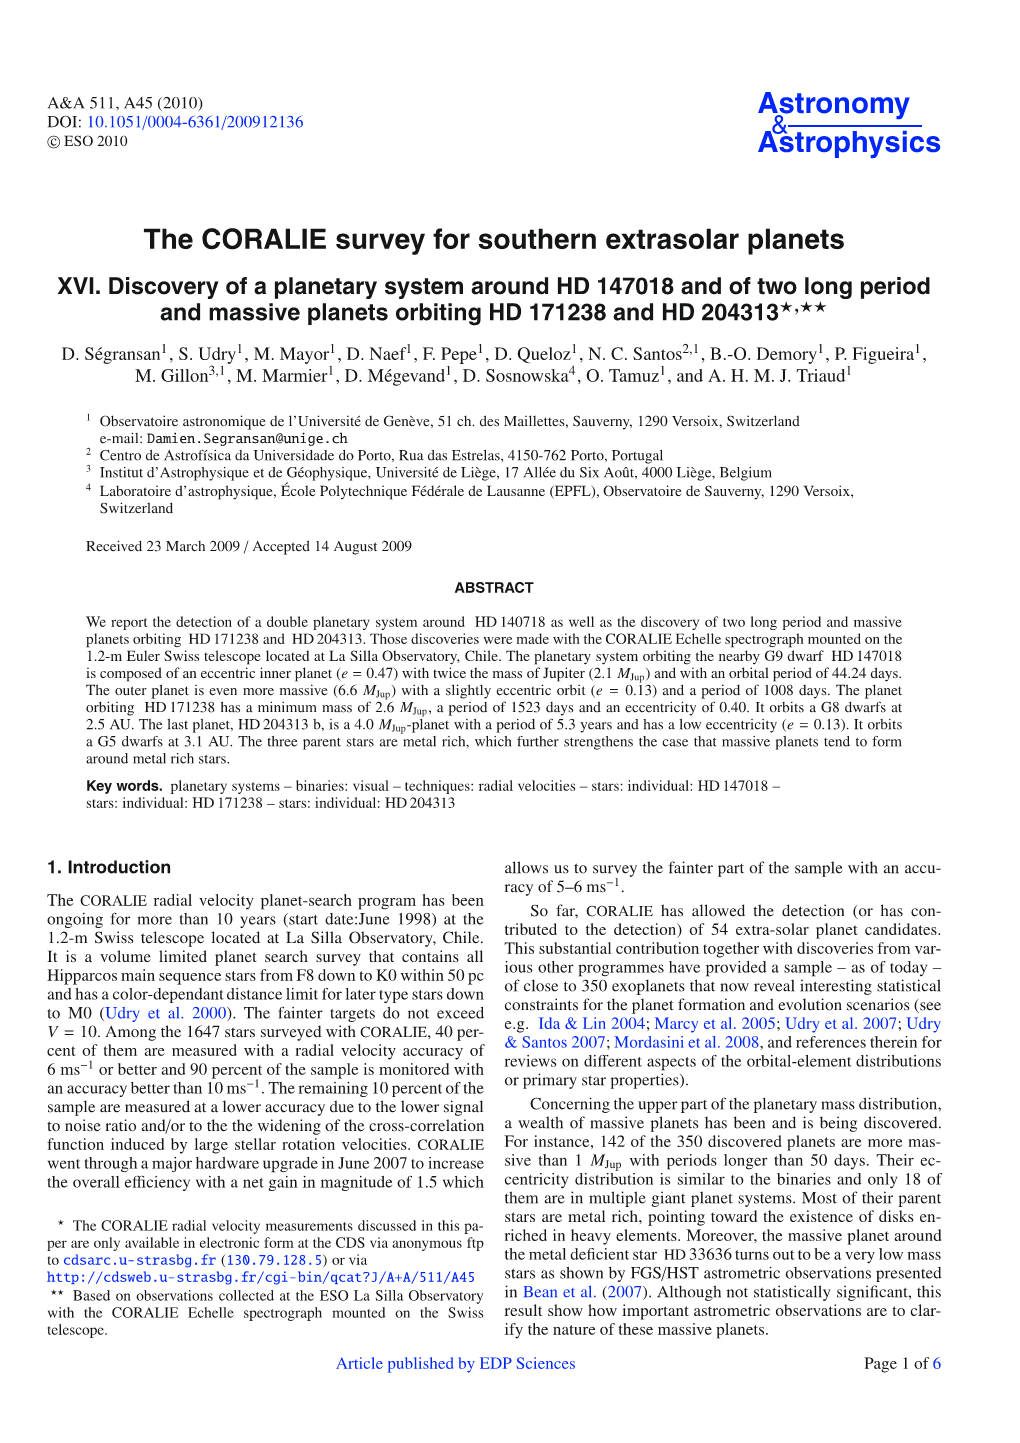 The CORALIE Survey for Southern Extrasolar Planets***